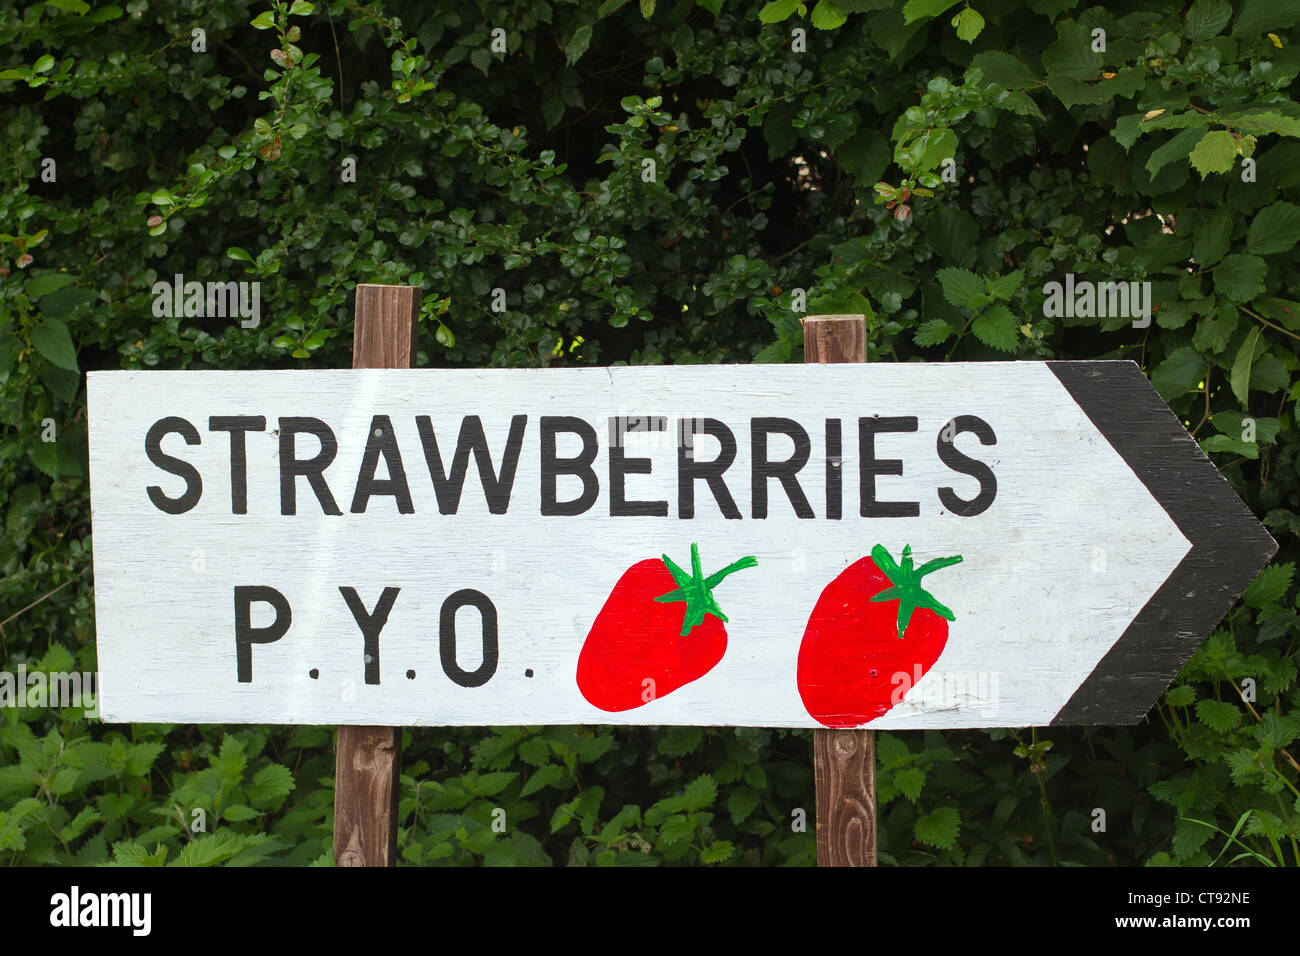 strawberries pick your own wooden sign Stock Photo